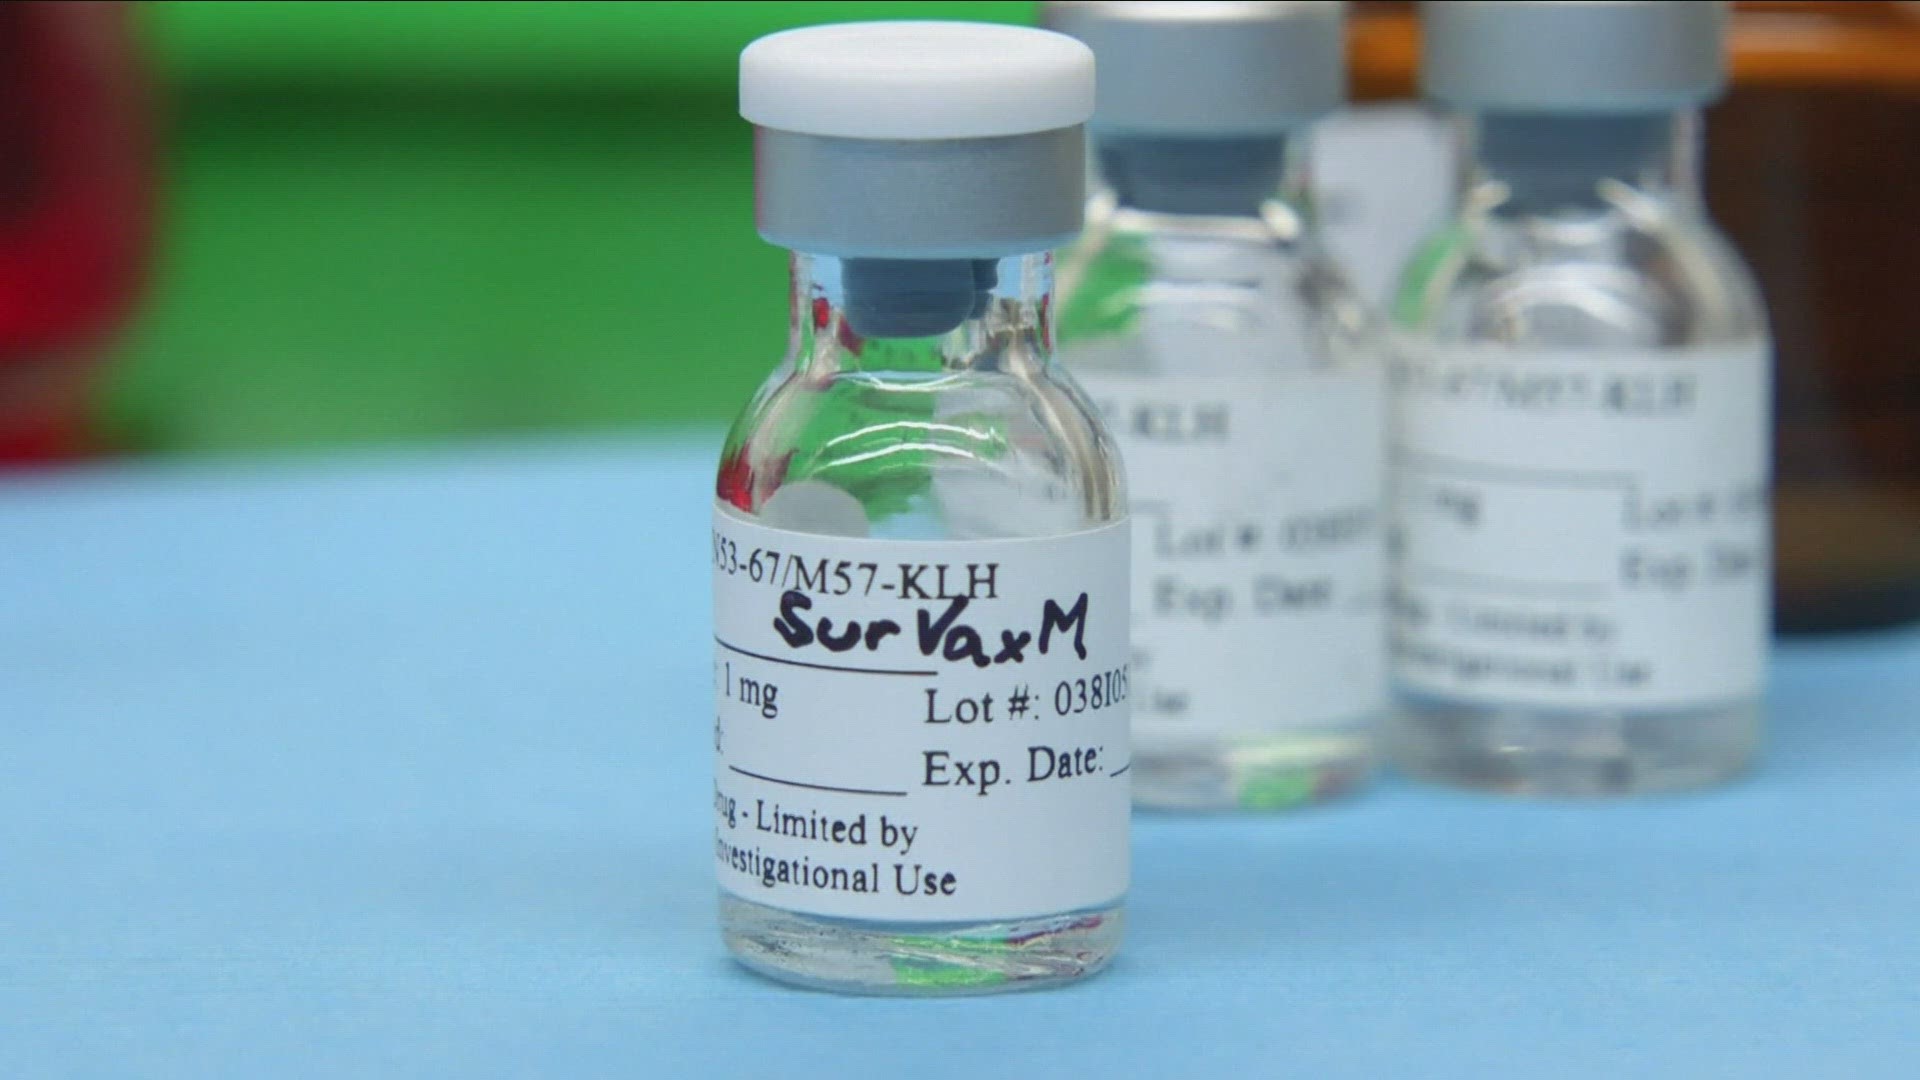 Clinical trials are underway at Roswell Park for a vaccine targeting a form of brain cancer that currently has no cure.